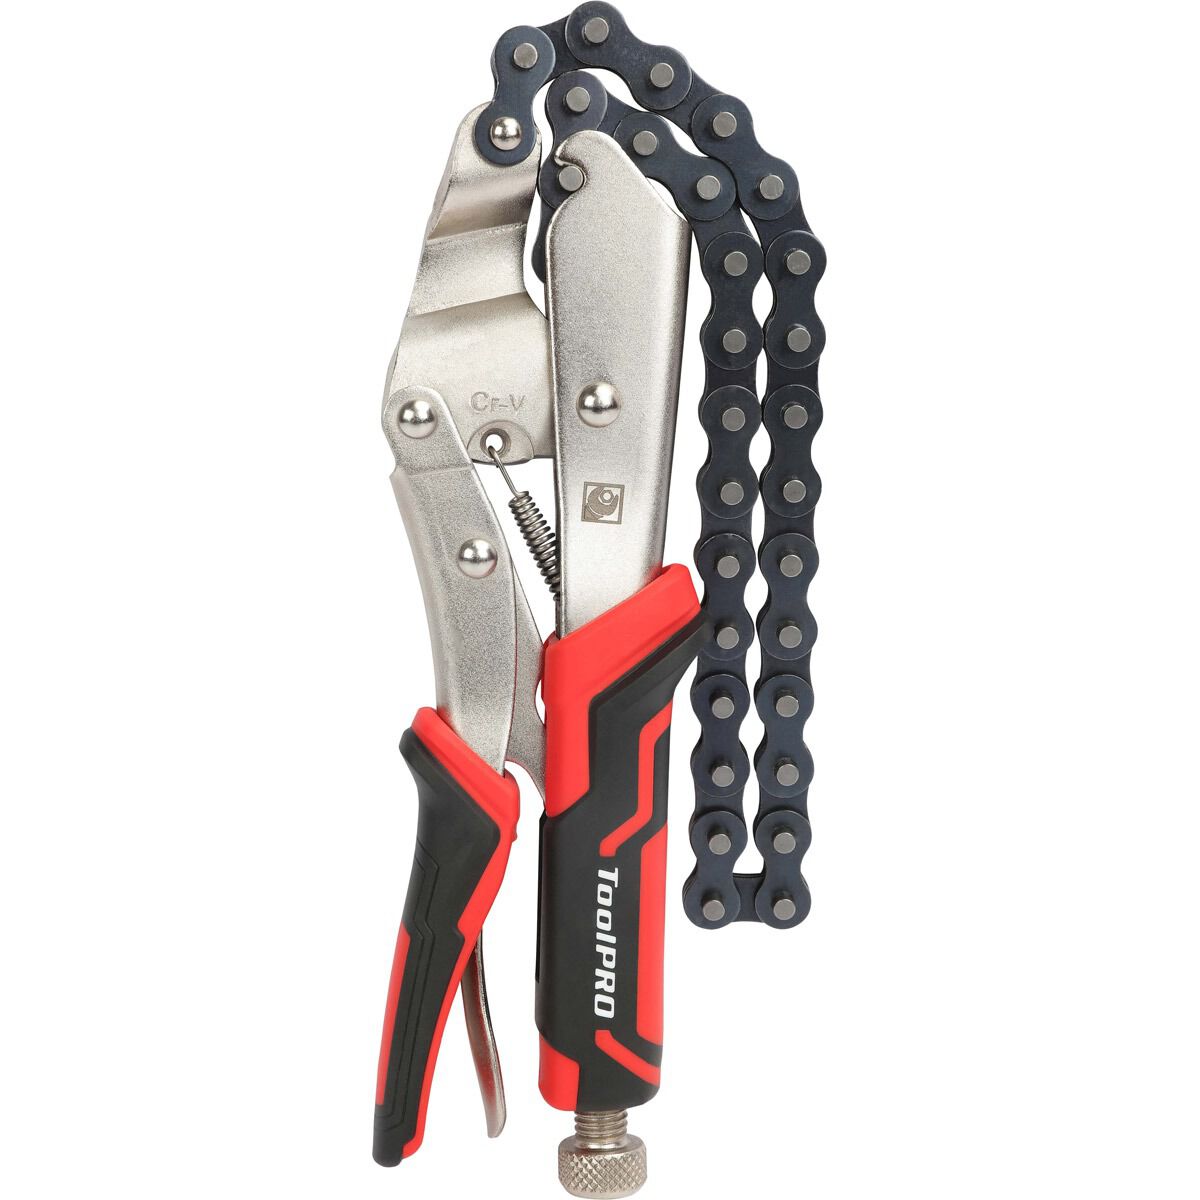 ToolPRO Locking Chain Pliers 475mm | Supercheap Auto